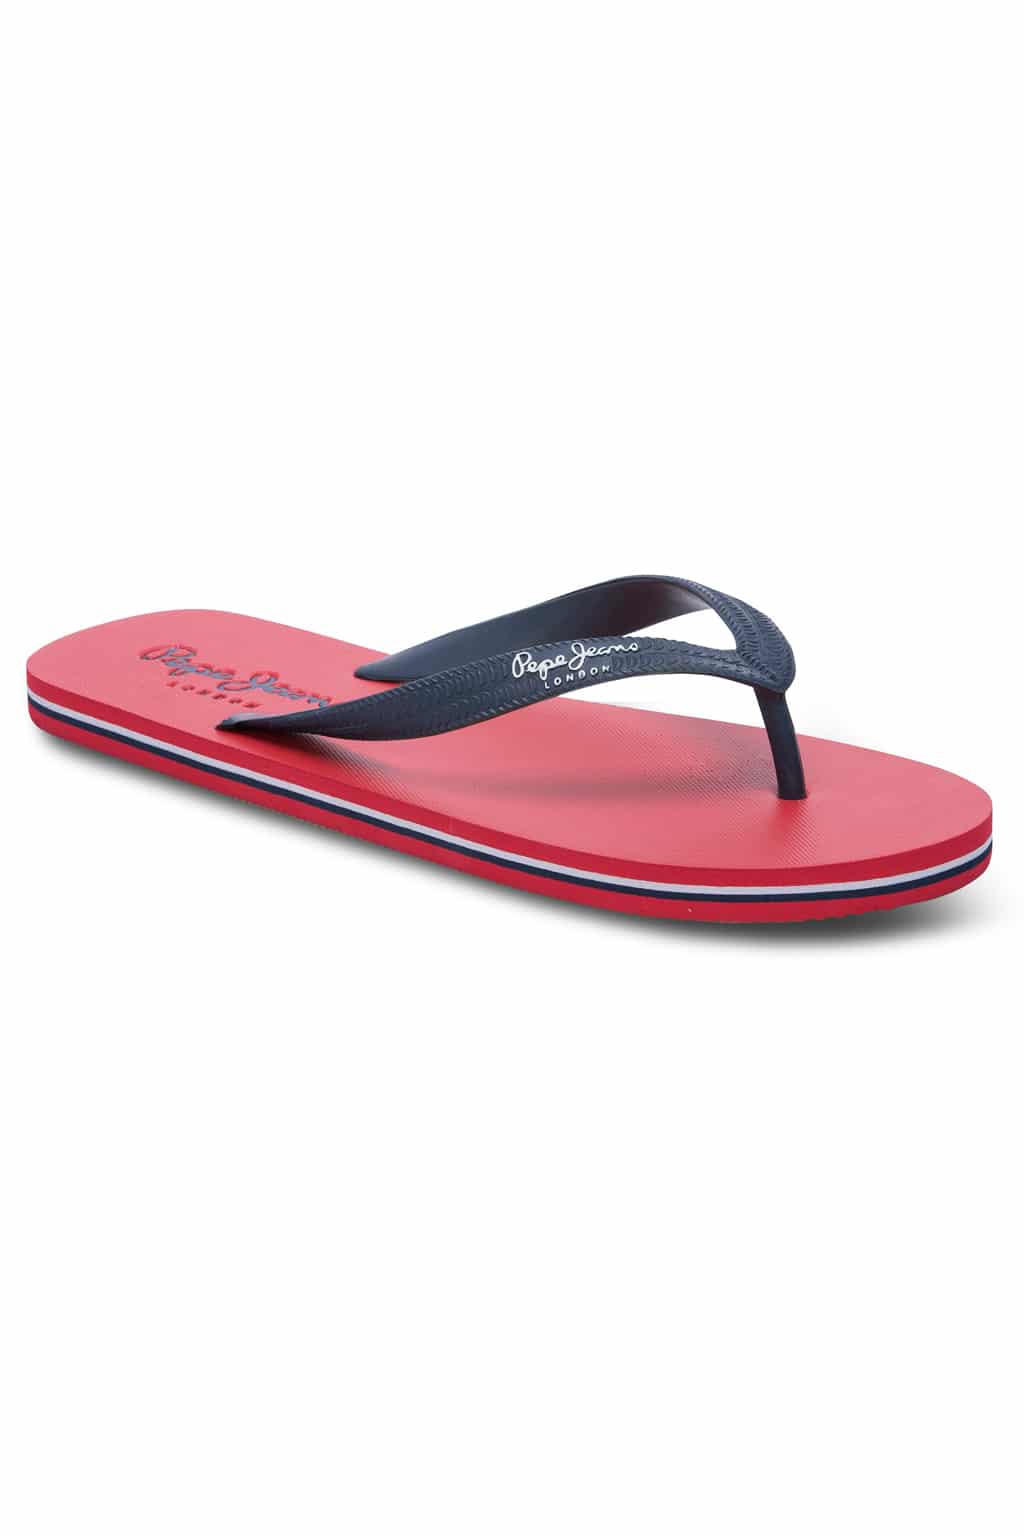 PEPE JEANS SWIMMING 2.1 PMS70052-220 FACTORY RED Κόκκινο